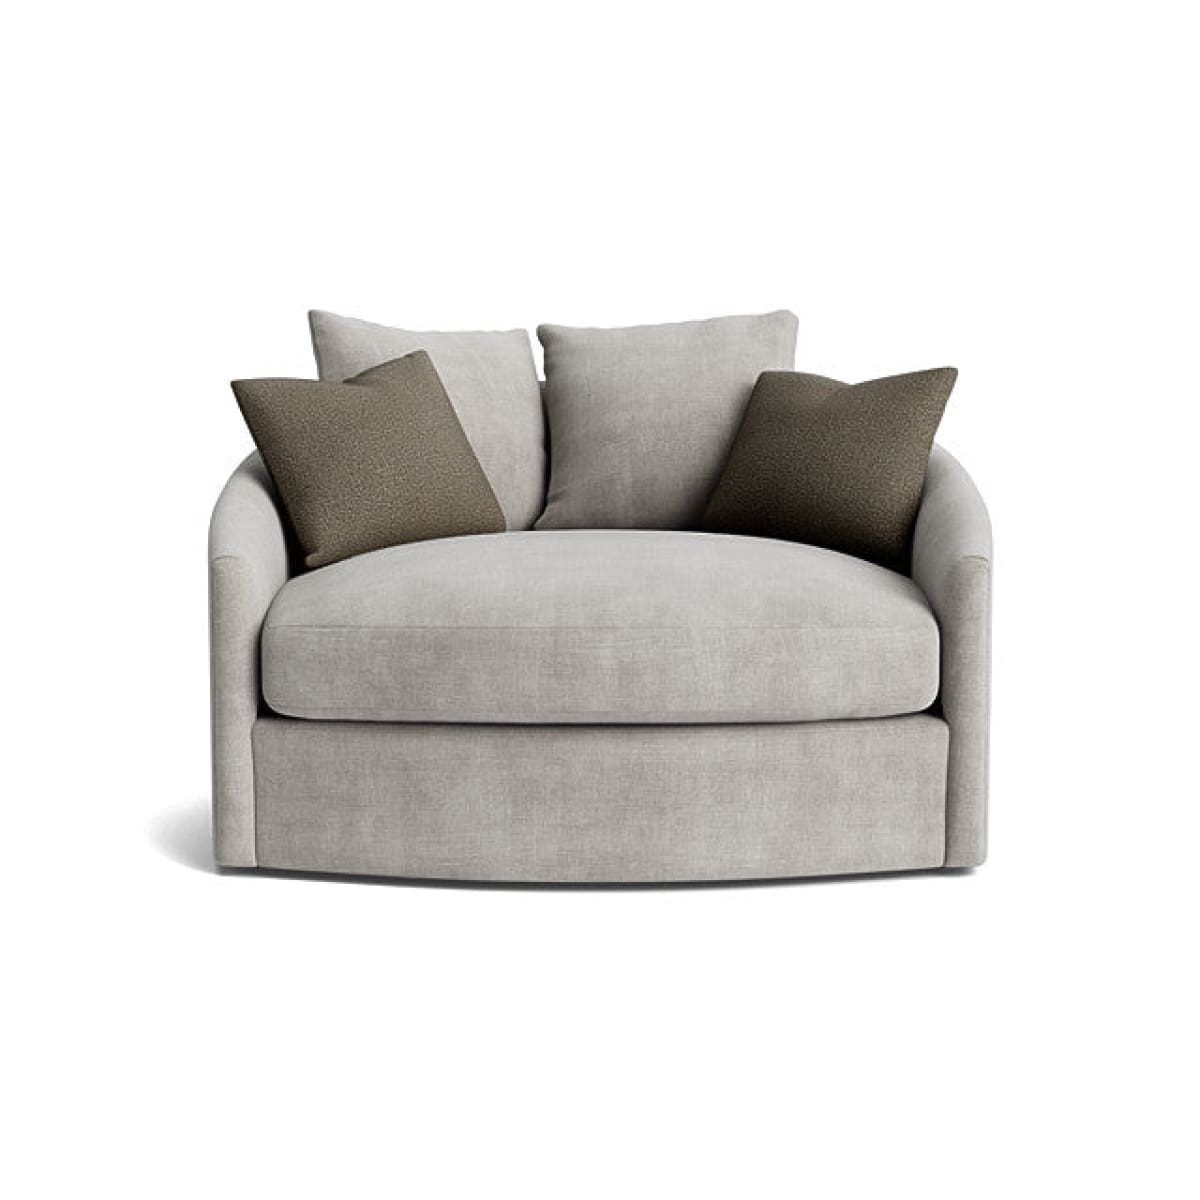 Escape Accent Chair - Analogy Gray